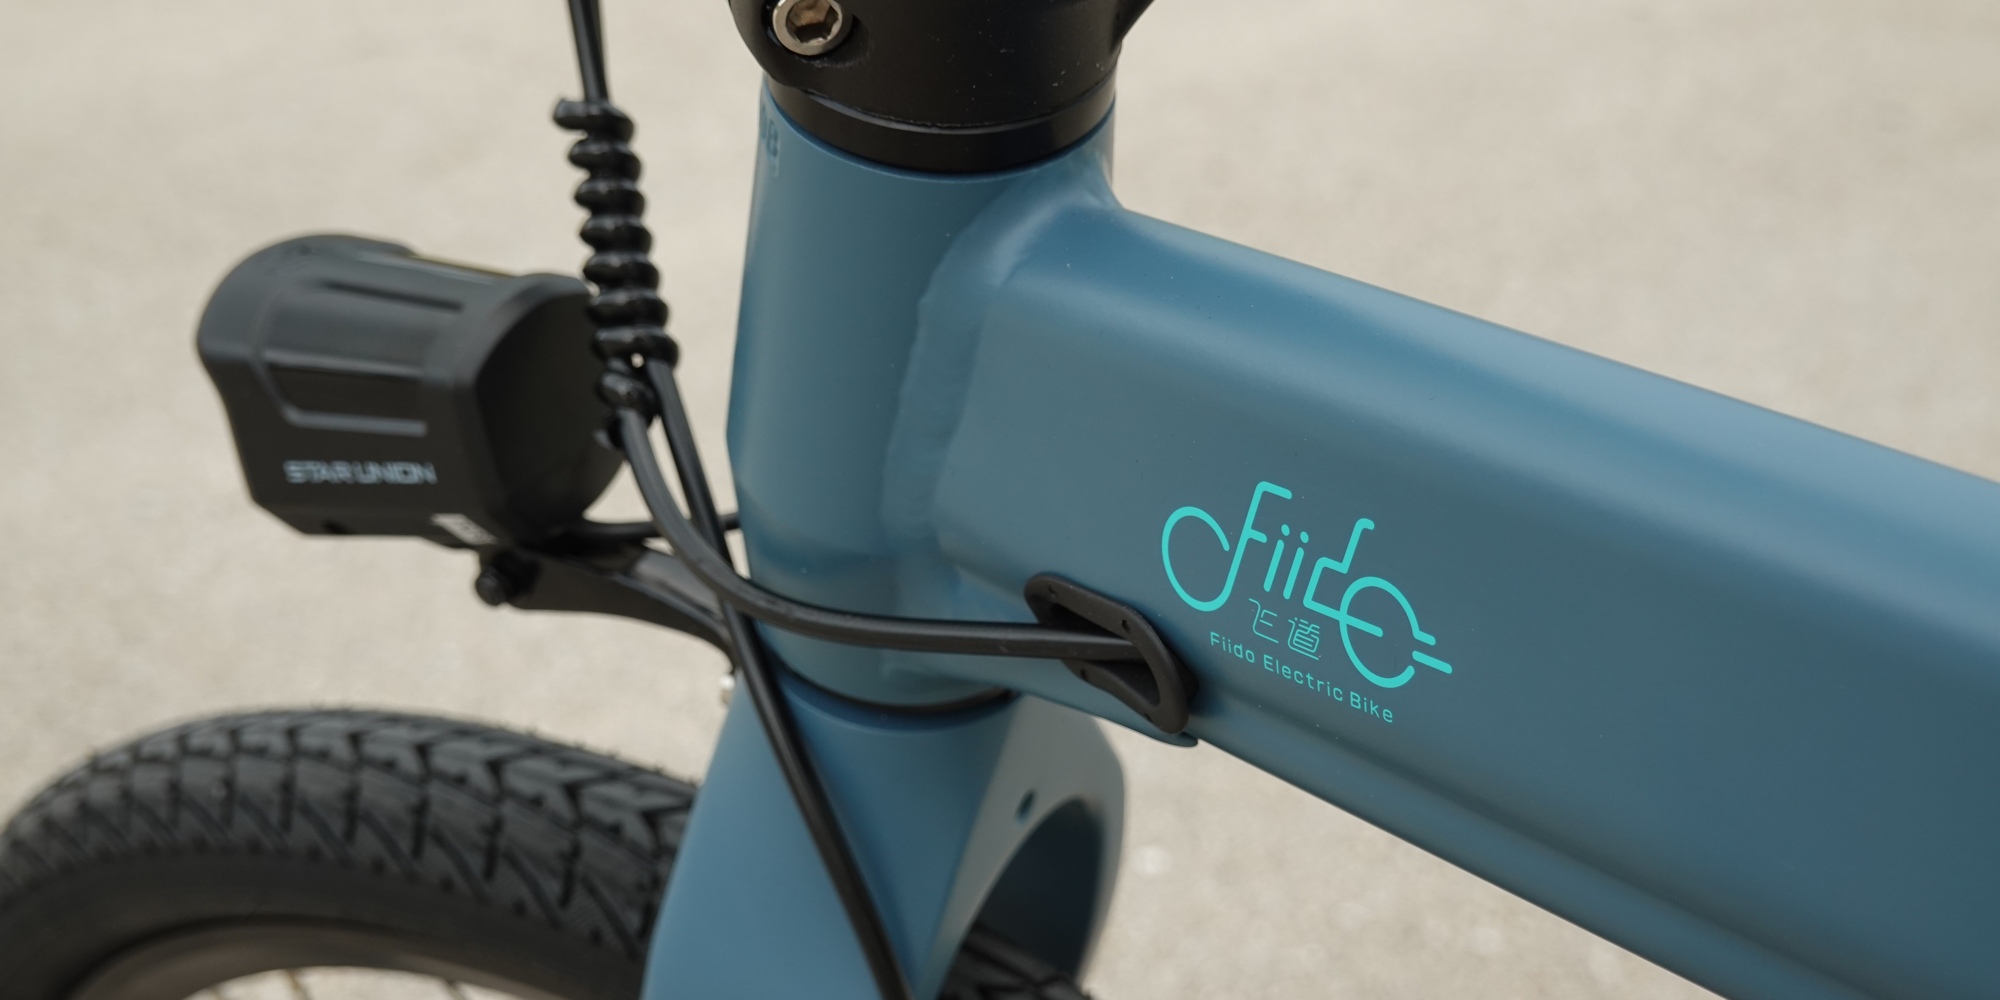 The Fiido D11 folding electric bicycle just launched last week on Indiegogo for pre-order at $799. That’s an awesome price for a slick-looking e-bik